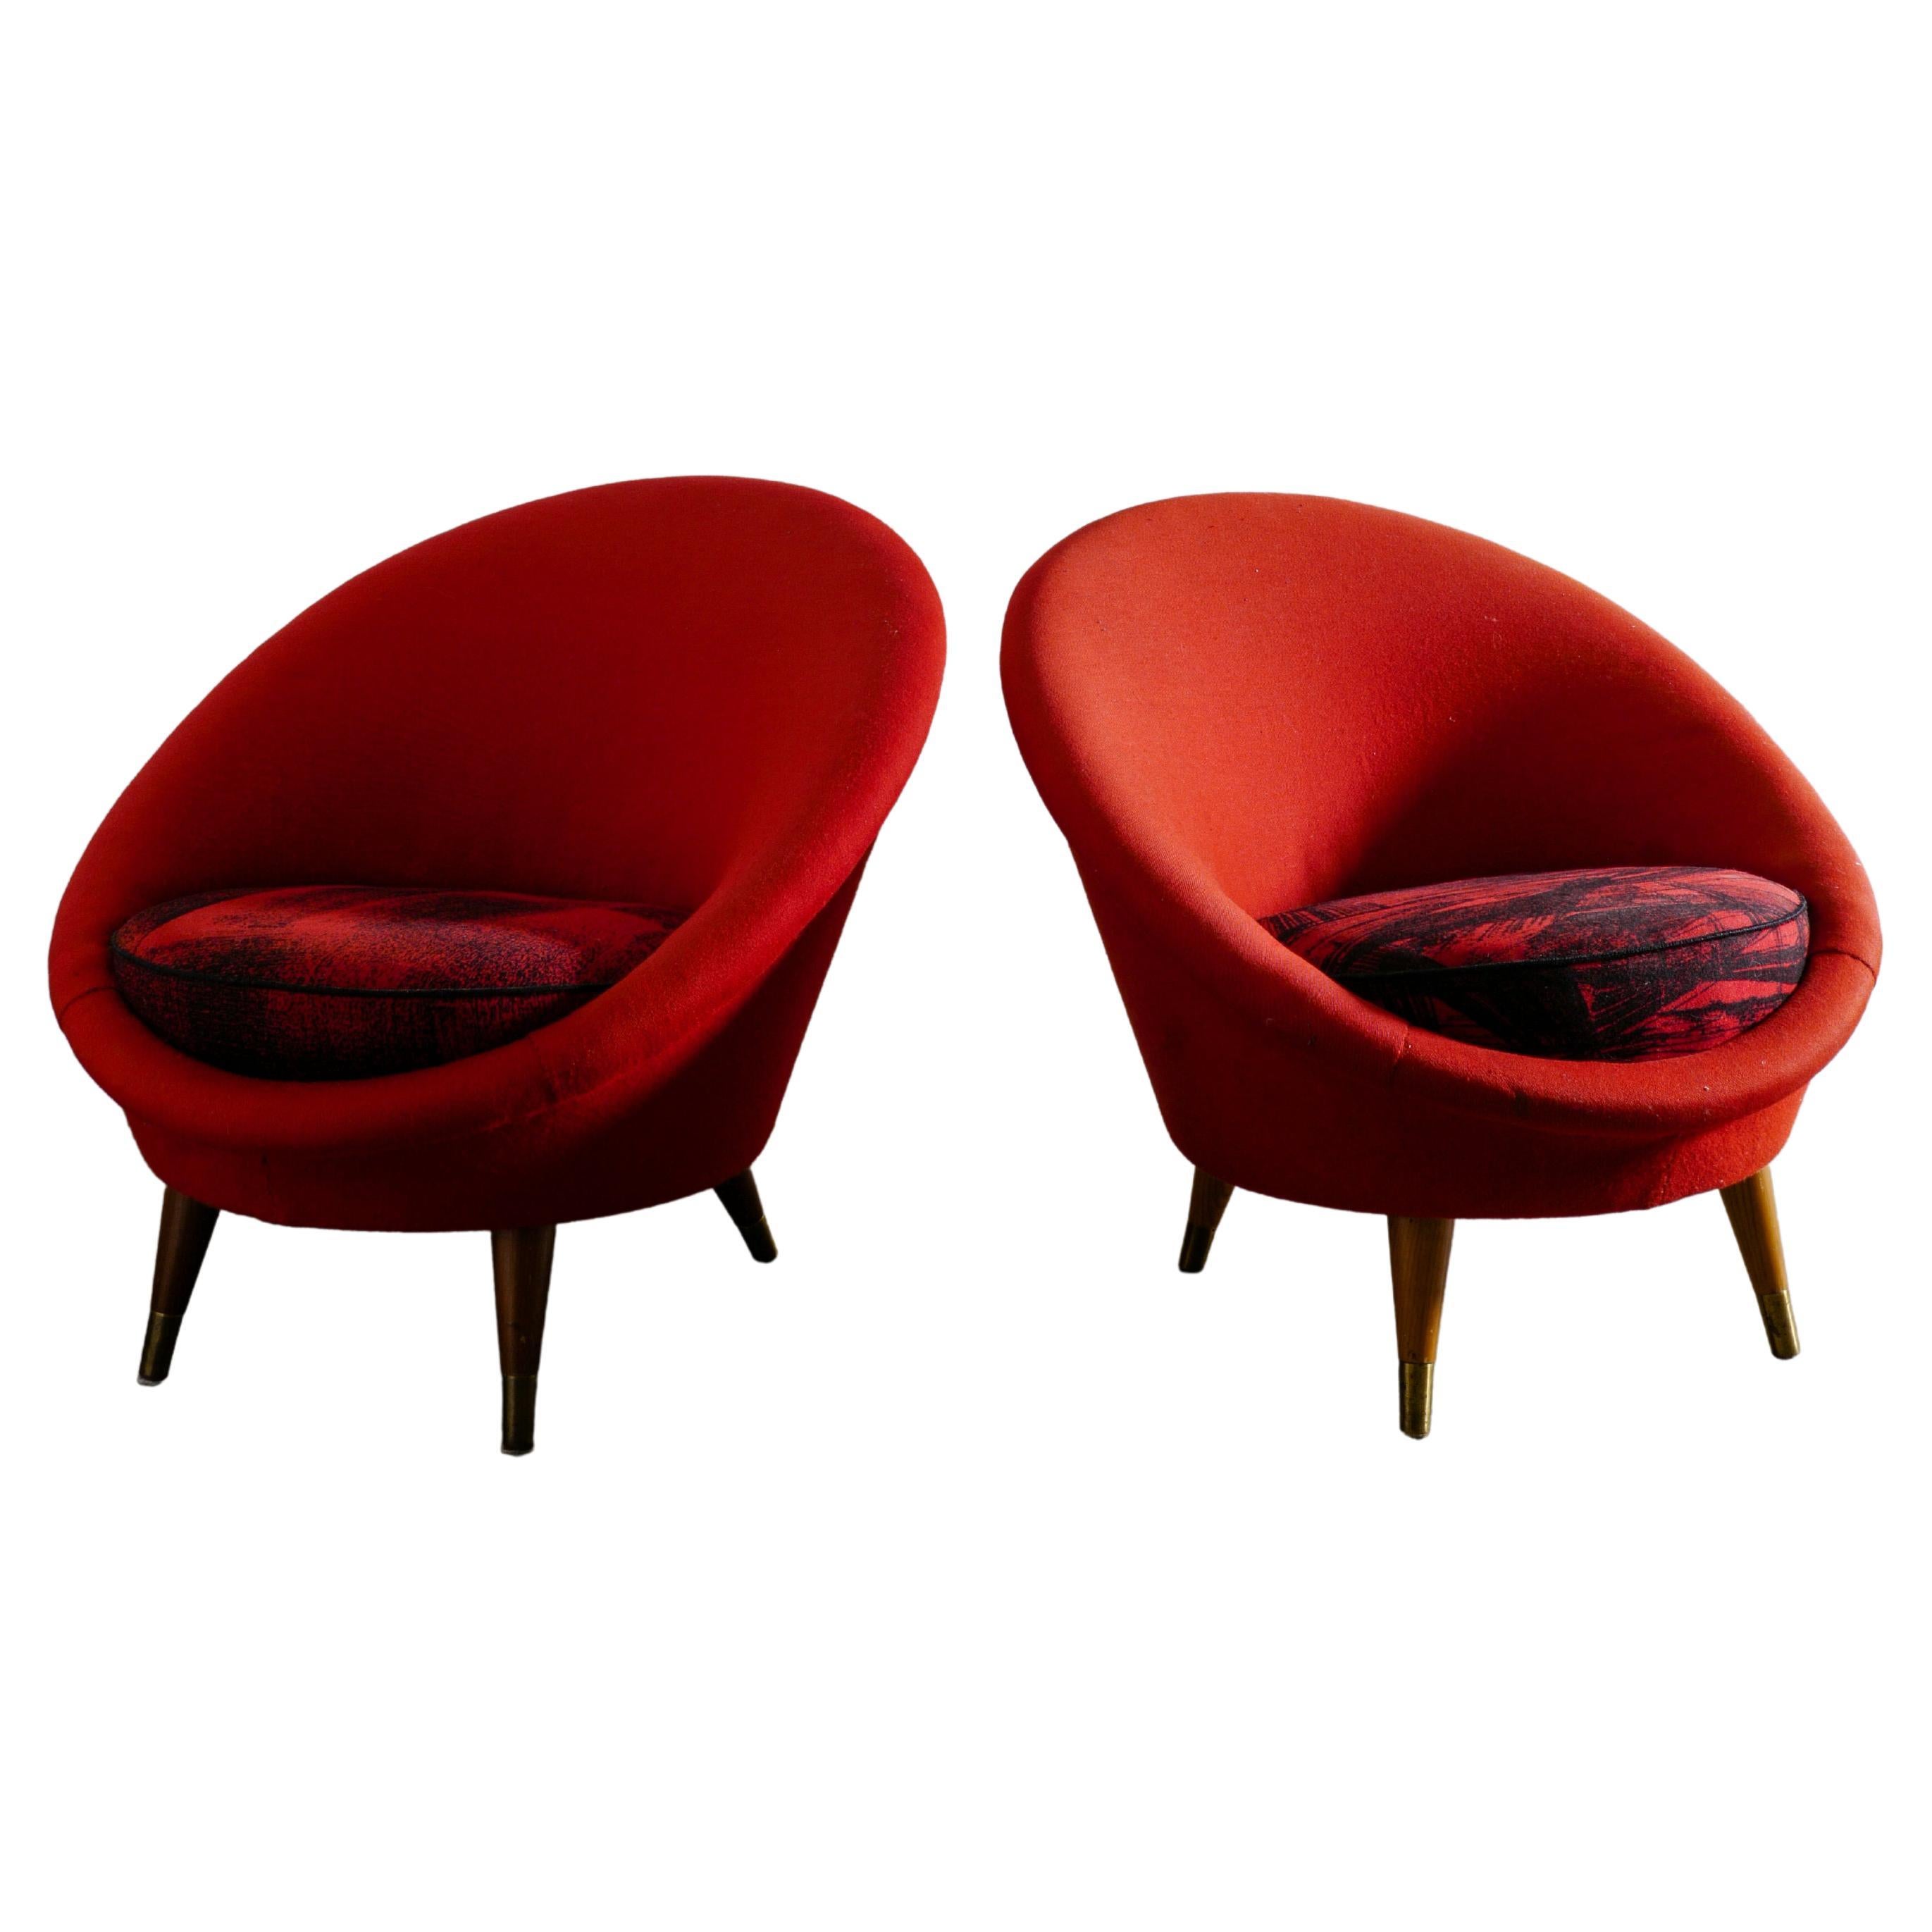 Vatne "Florida" Easy Egg Chairs  Produced in Norway, 1950s